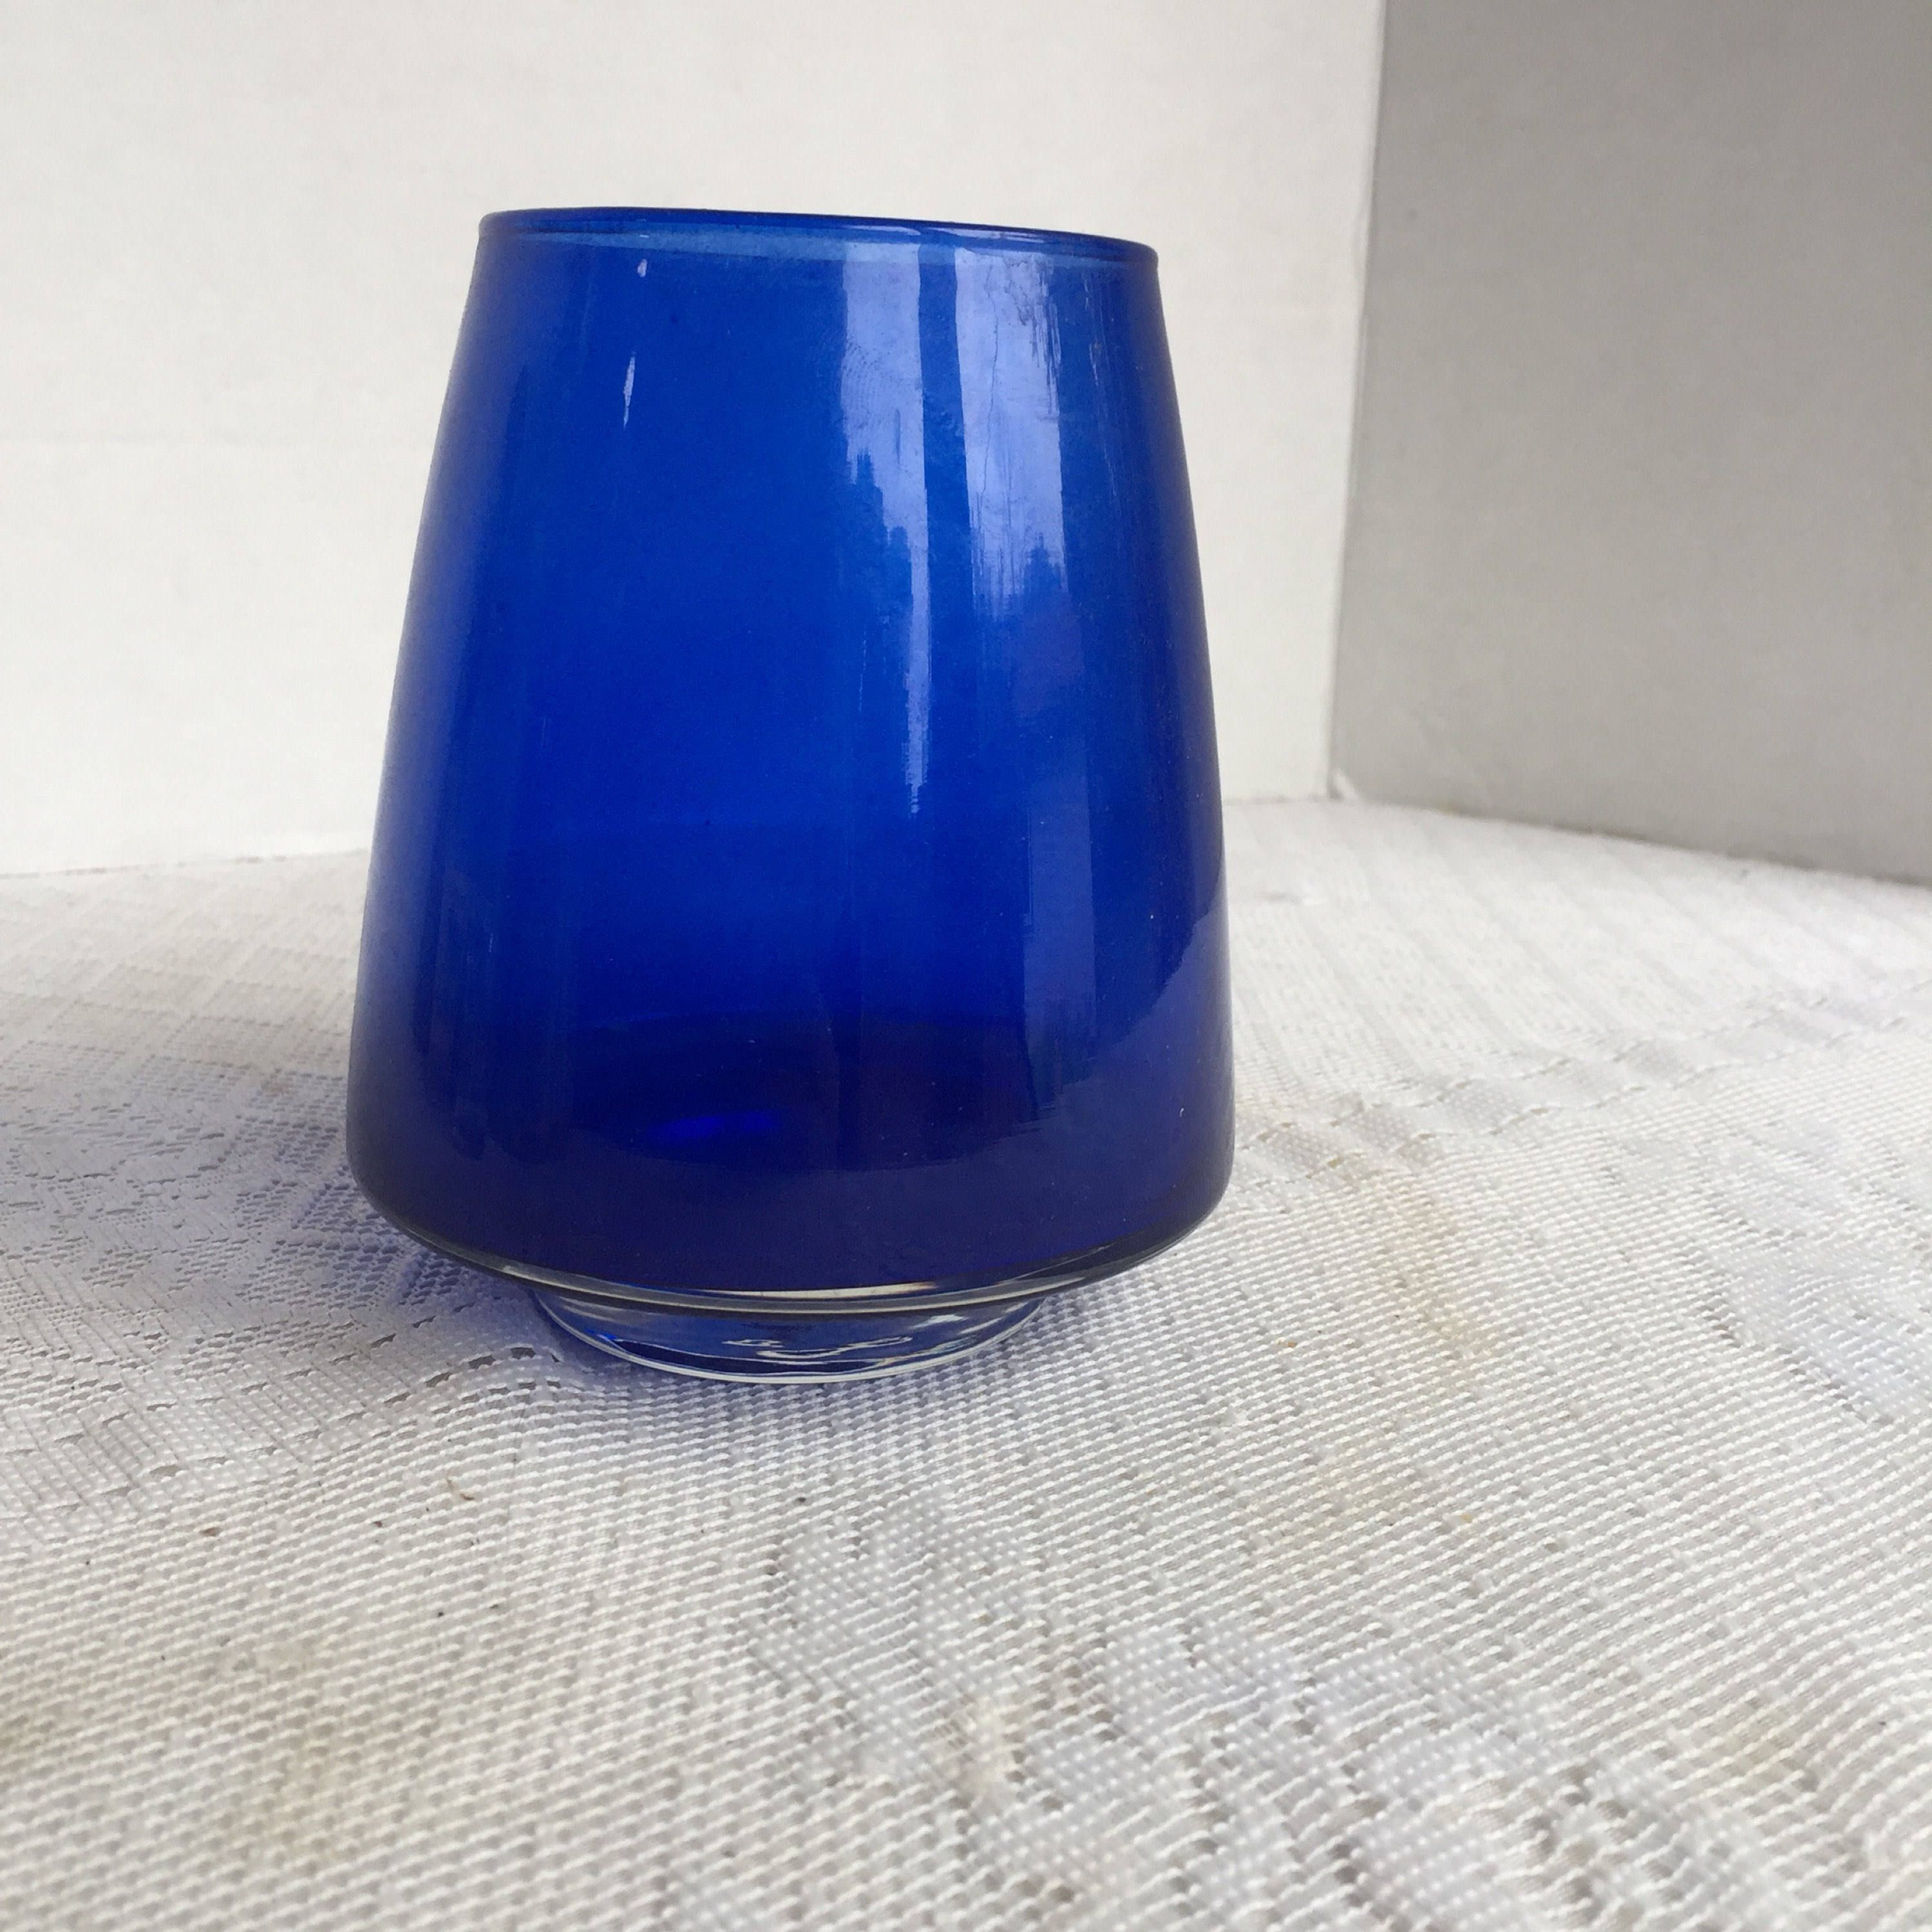 26 Cute Colored Glass Vases for Centerpieces 2024 free download colored glass vases for centerpieces of cobalt blue glass cone shaped vase vintage seventies floral regarding cobalt blue glass cone shaped vase vintage seventies floral supplies by vintagep